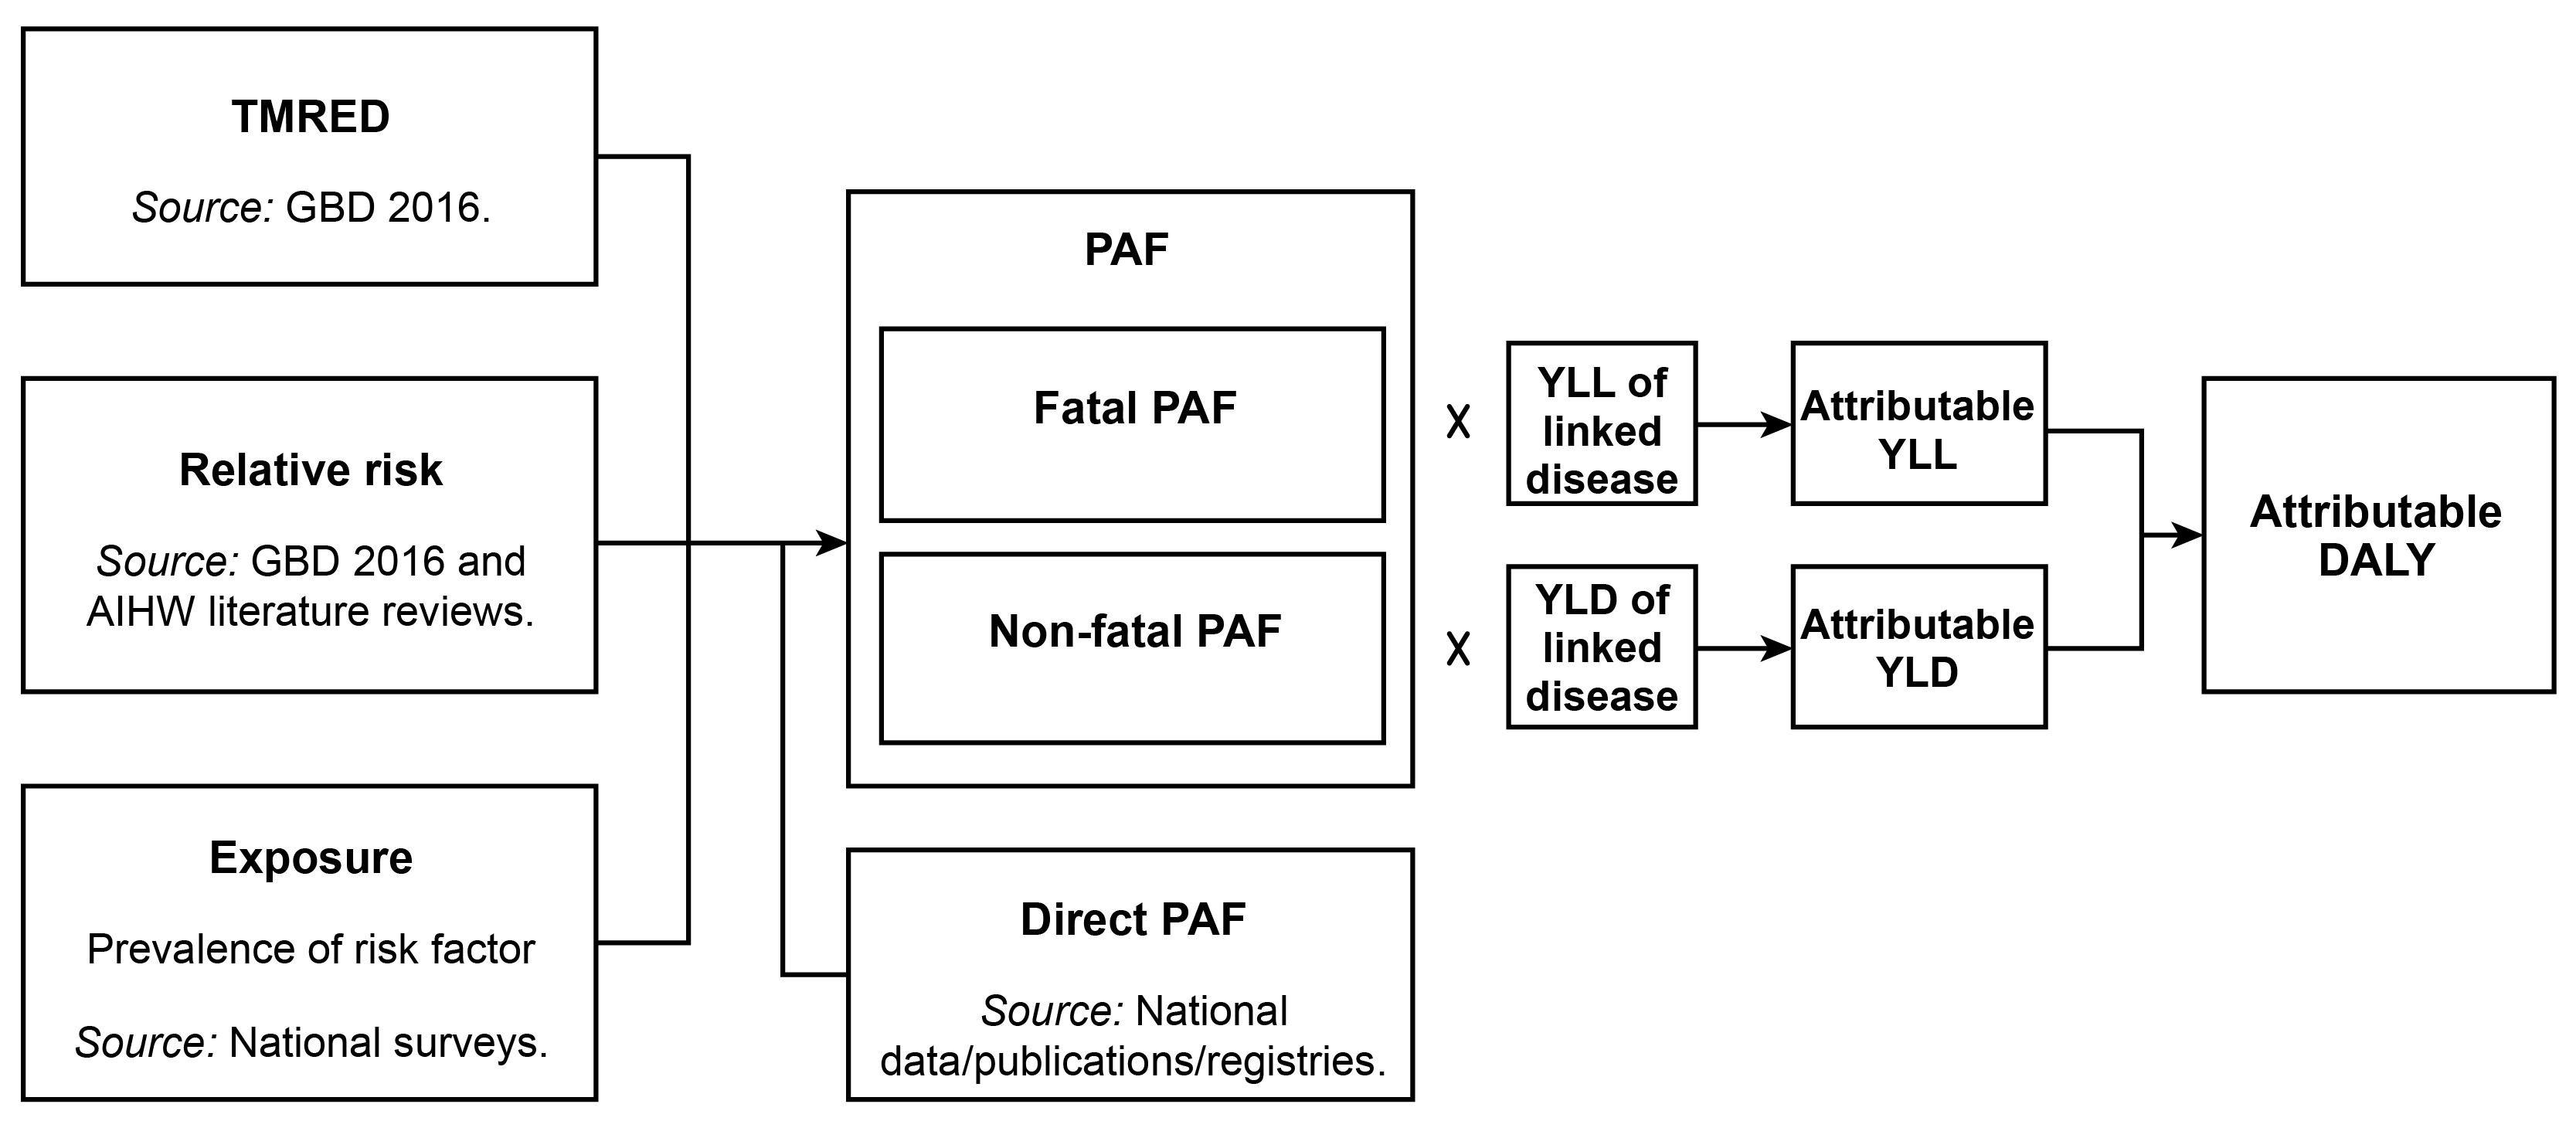 This figure is a flowchart describing the process of calculating risk factor attributable burden. The flowchart indicates that inputs of the theoretical minimum risk distribution, relative risks and risk factor exposure data are required to calculate population attributable fractions (PAFs). Direct evidence is also shown as an alternative to obtaining PAFs. PAFs are then multiplied by burden of disease estimates of years lived with disability (YLD) and years of life lost (YLL) to produce attributable YLL and YLD which can be summed to produce attributable disability-adjusted life years (DALY).